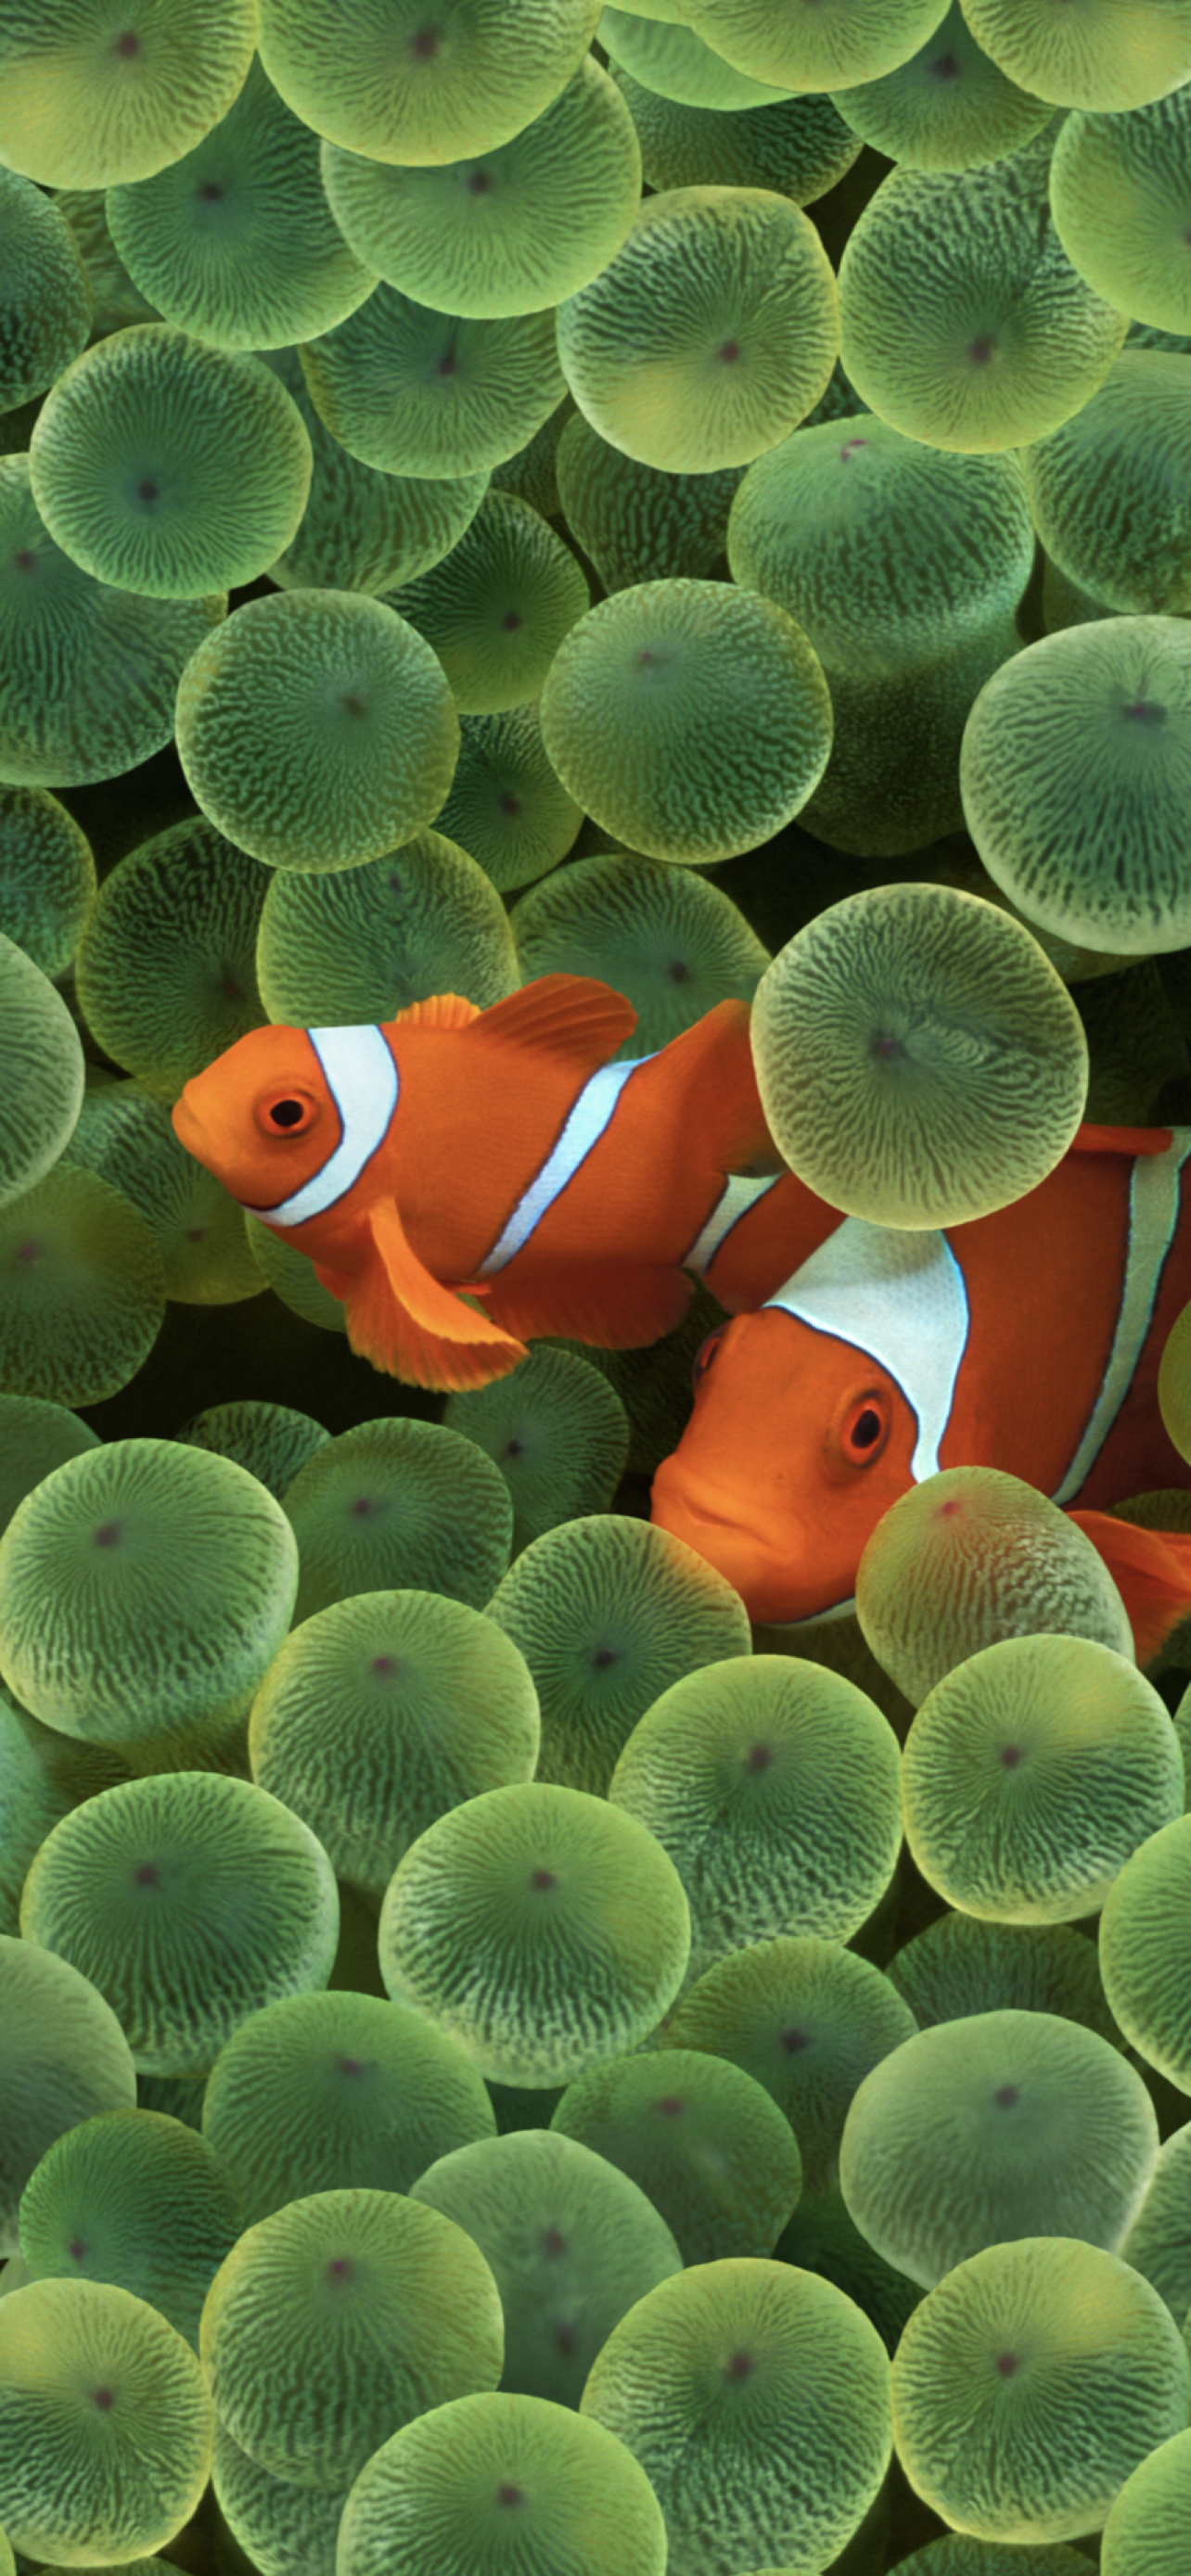 iOS 16 includes clownfish wallpaper from original iPhone   9to5Mac 1284x2778